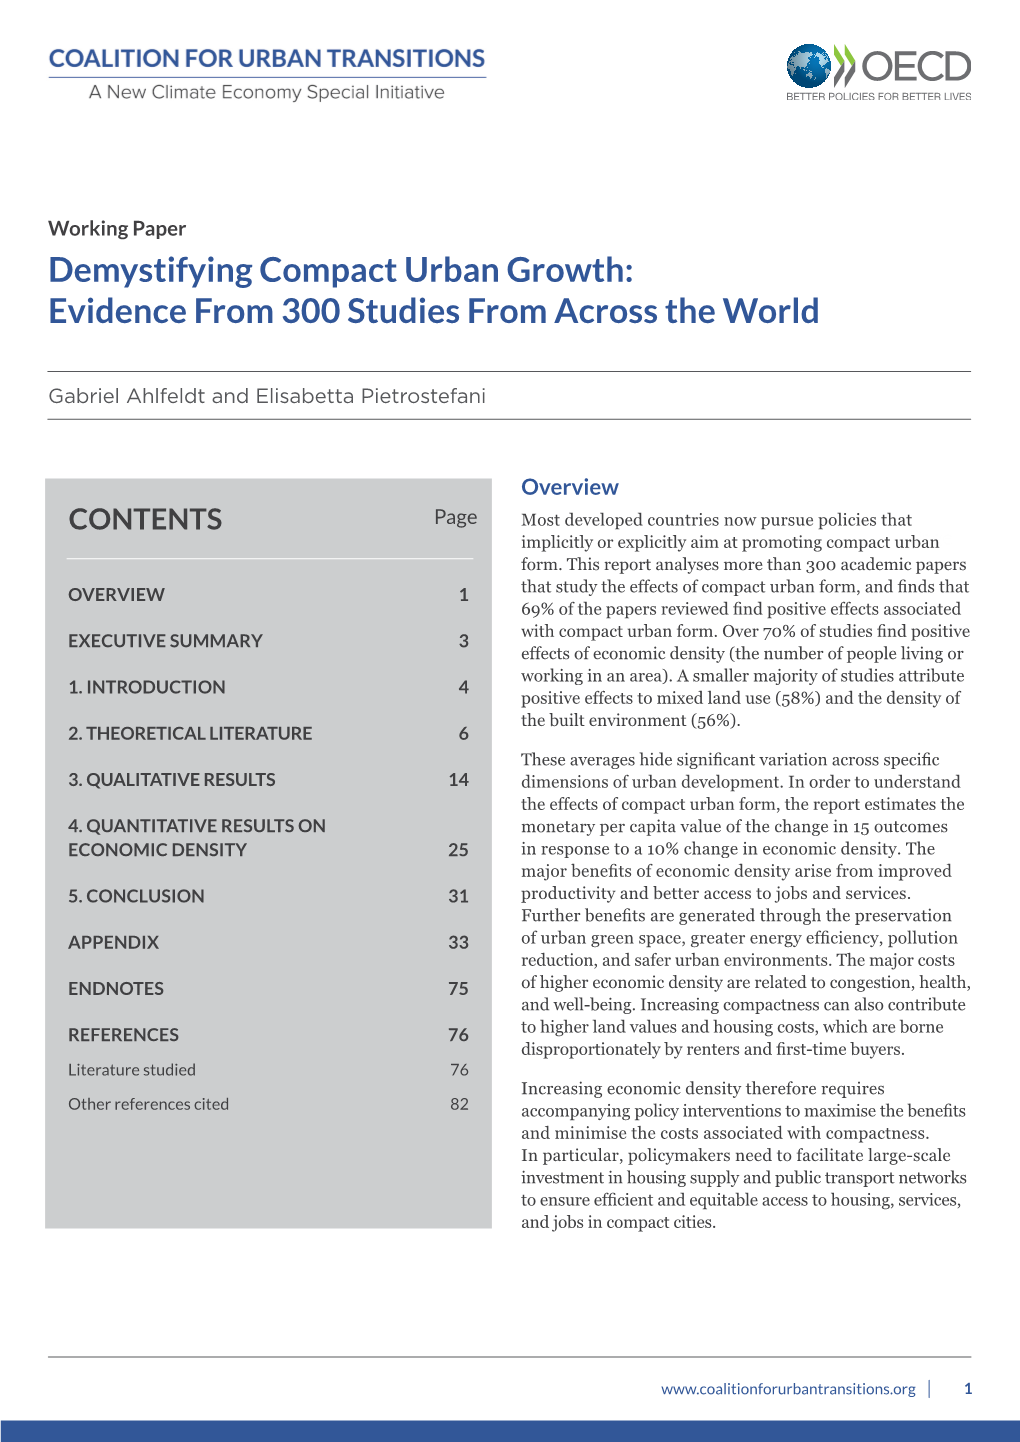 Demystifying Compact Urban Growth: Evidence from 300 Studies from Across the World